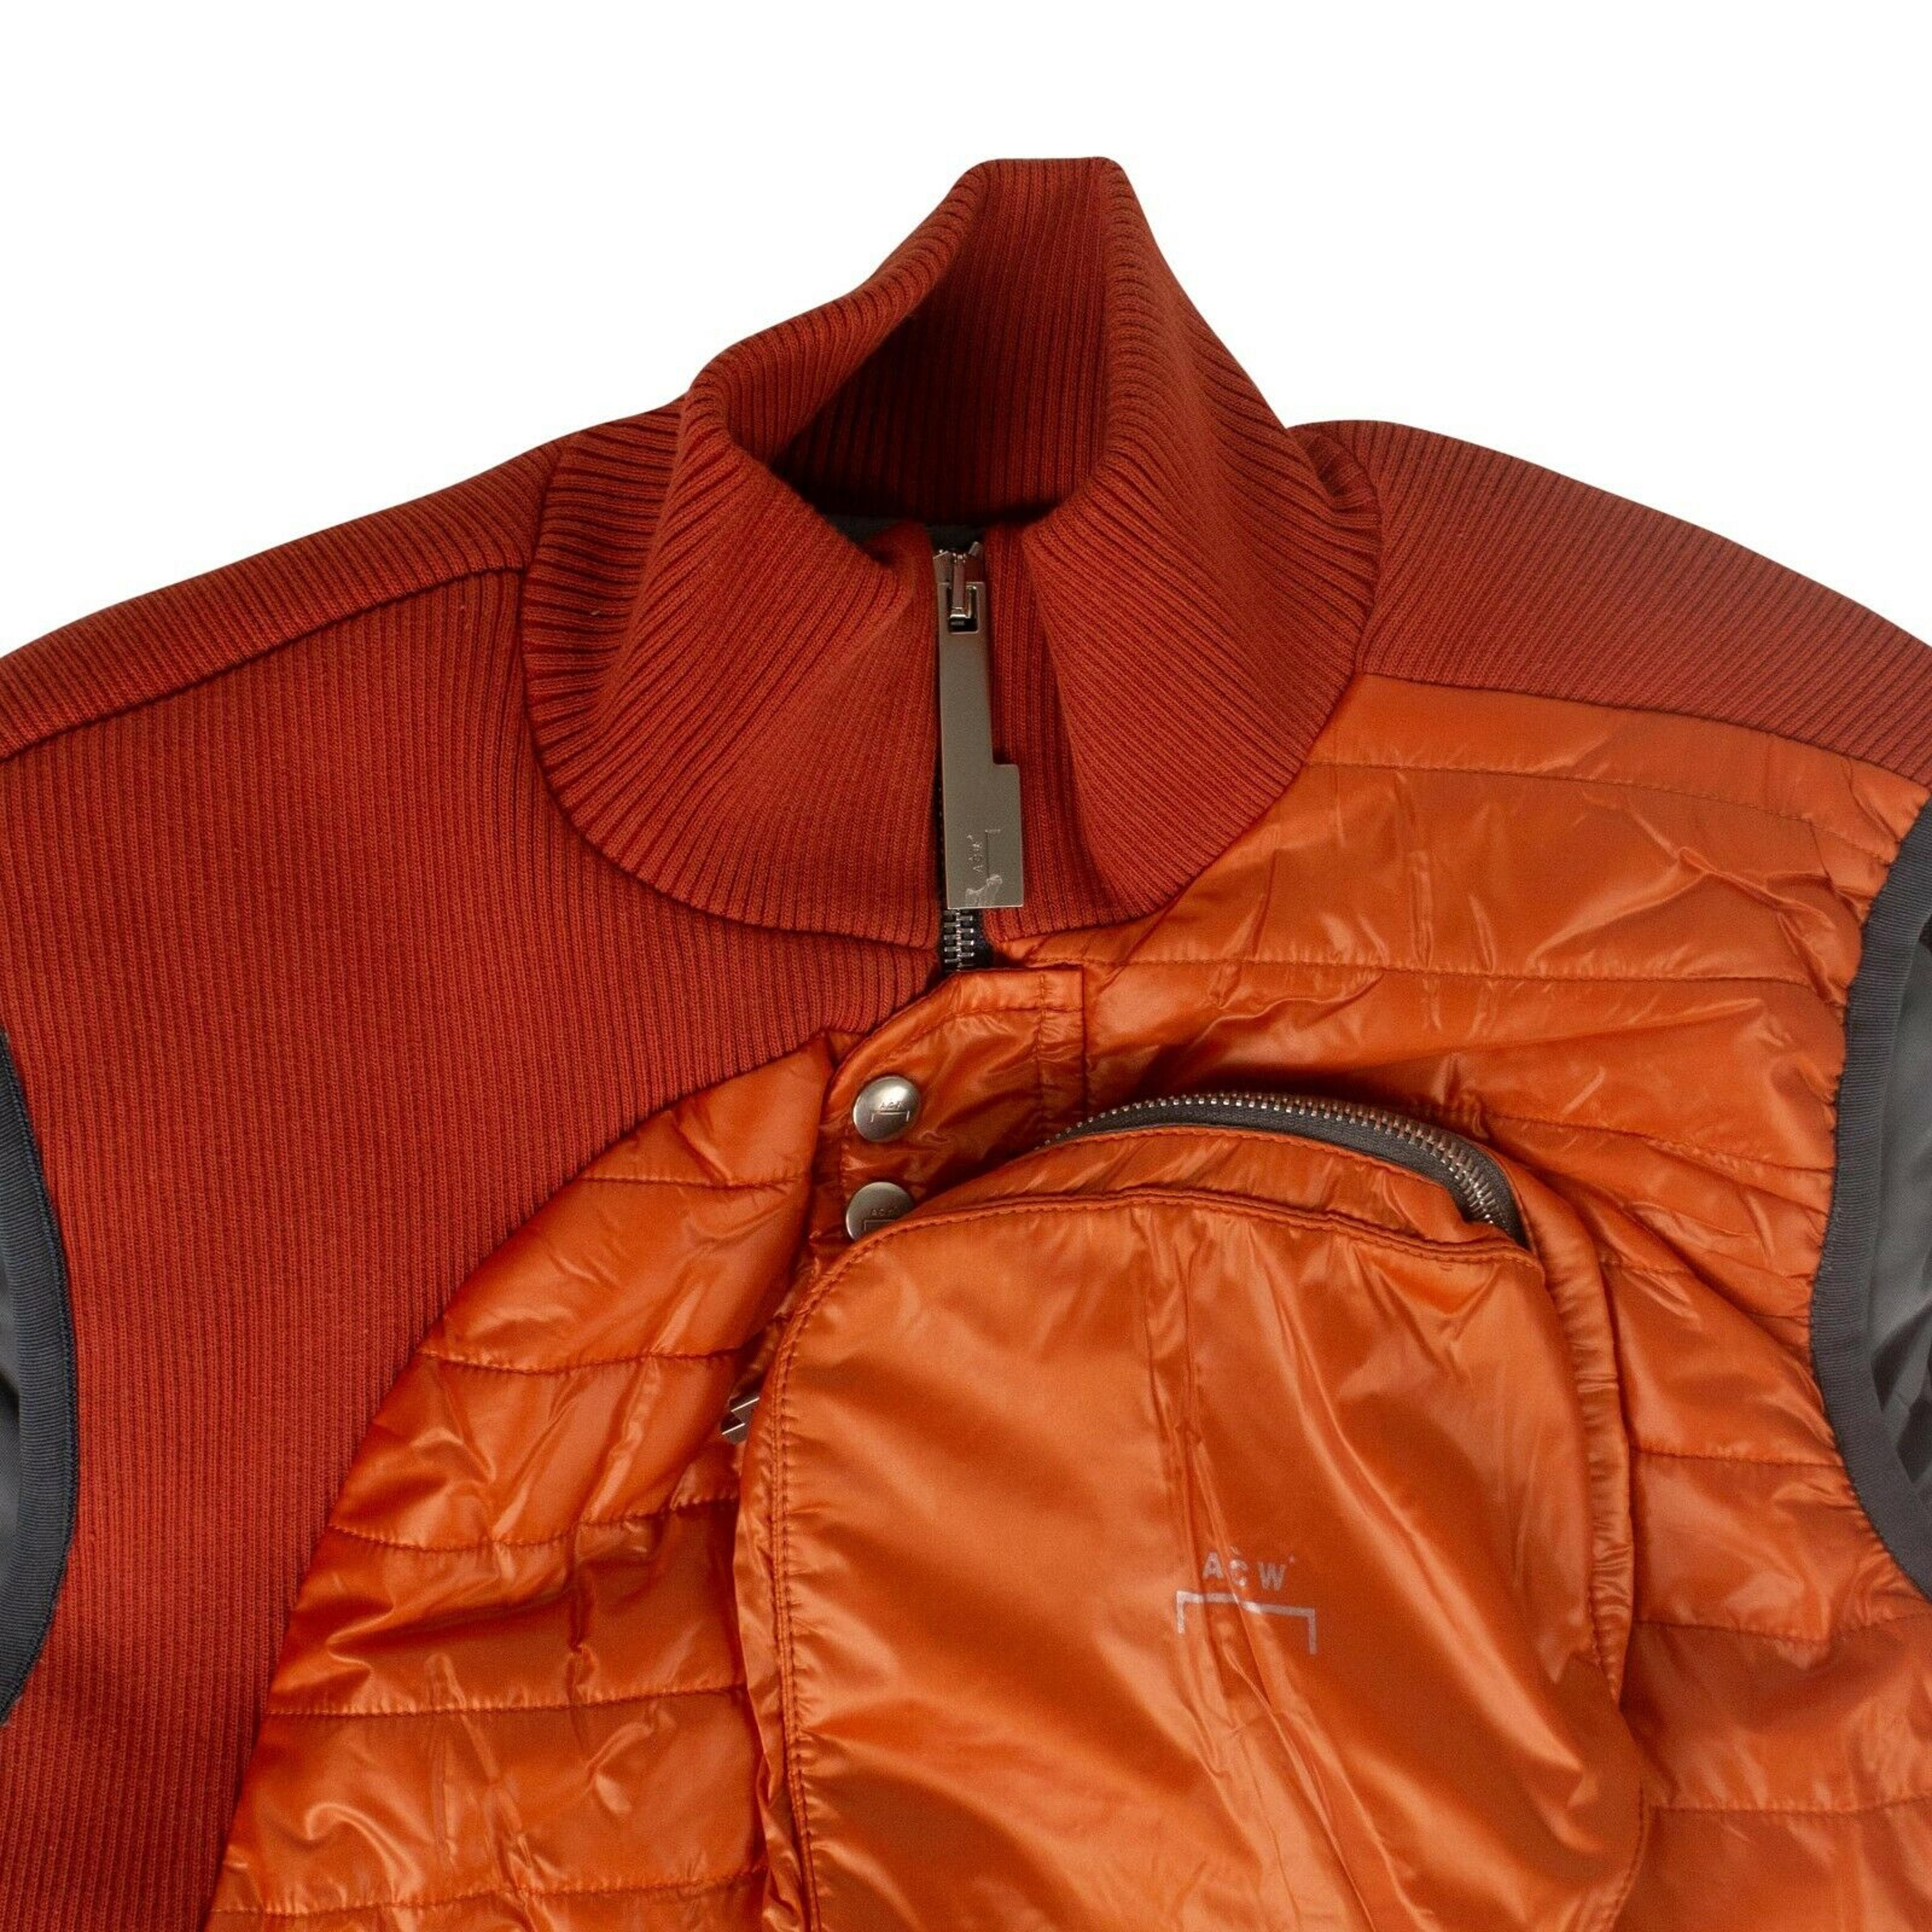 Alternate View 2 of A-COLD-WALL* Men's Puffer Panelled Jacket Vest - Orange